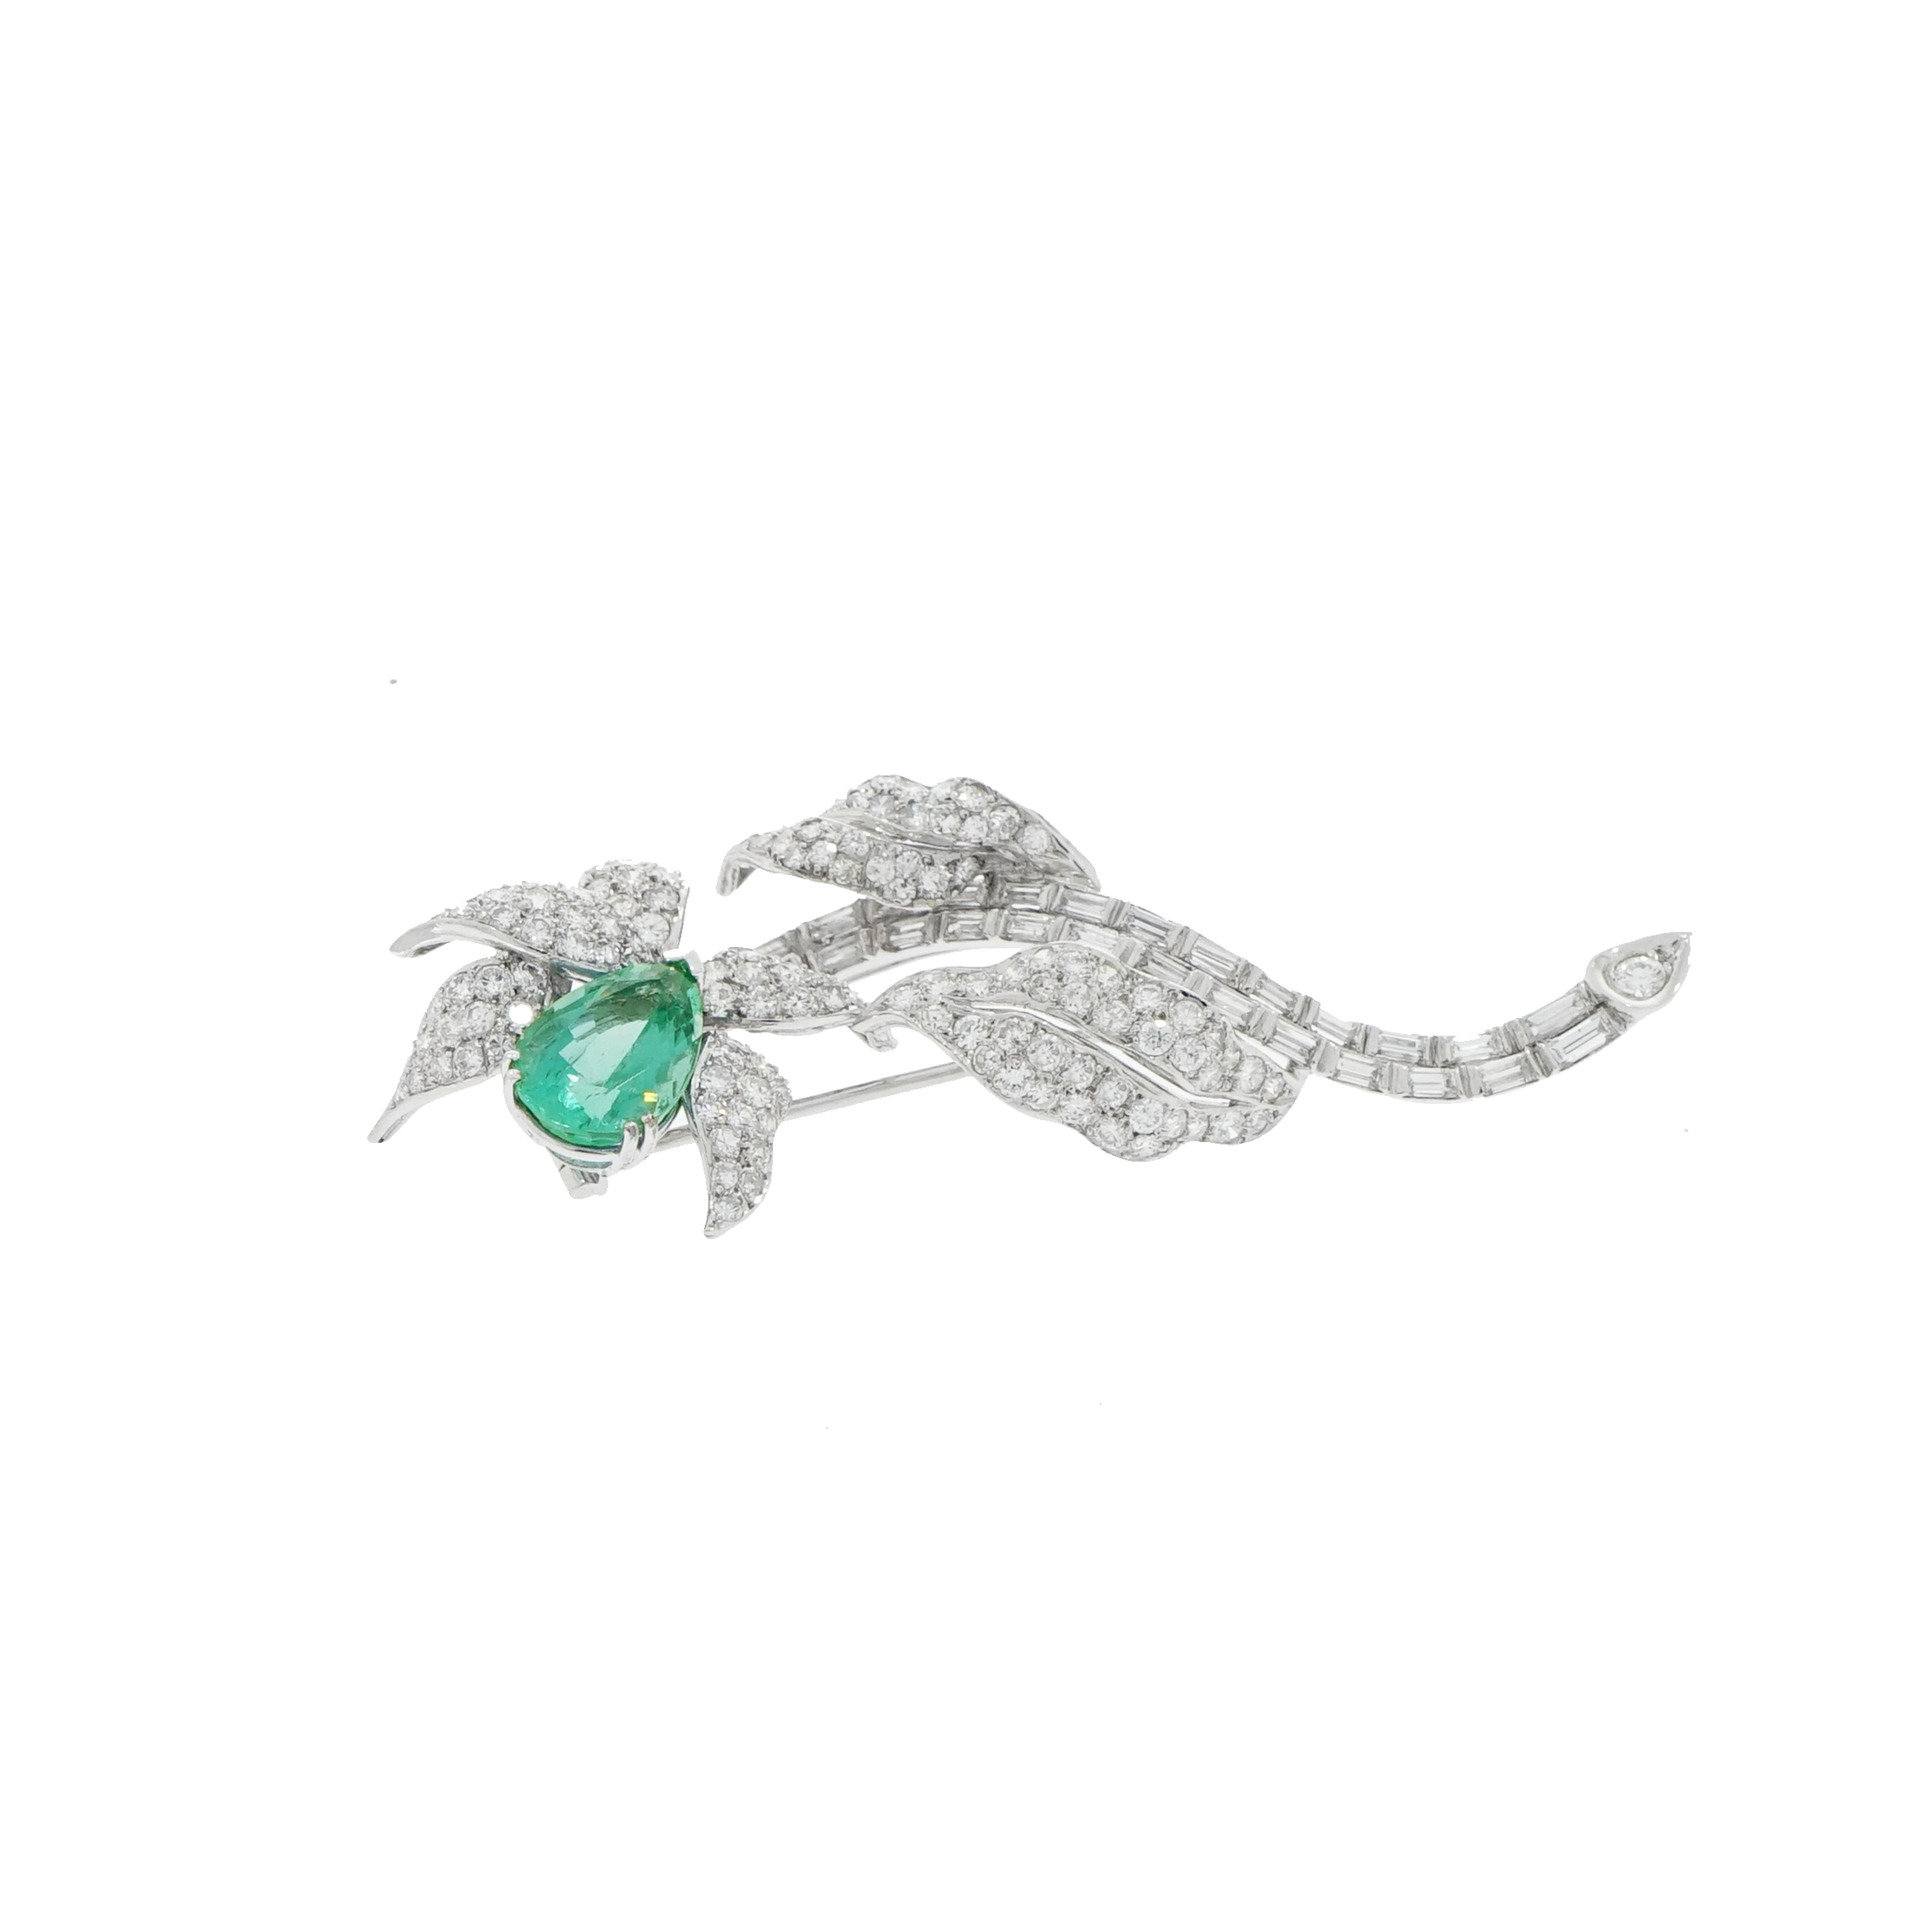 Looking for something a little more dazzling... Look no further!! 
This glamorous and absolutely gorgeous pear shaped natural beryl and diamond brooch is magnificent!!
Beryl is a most alluring and popular mineral. It occurs in a diversity of colors,